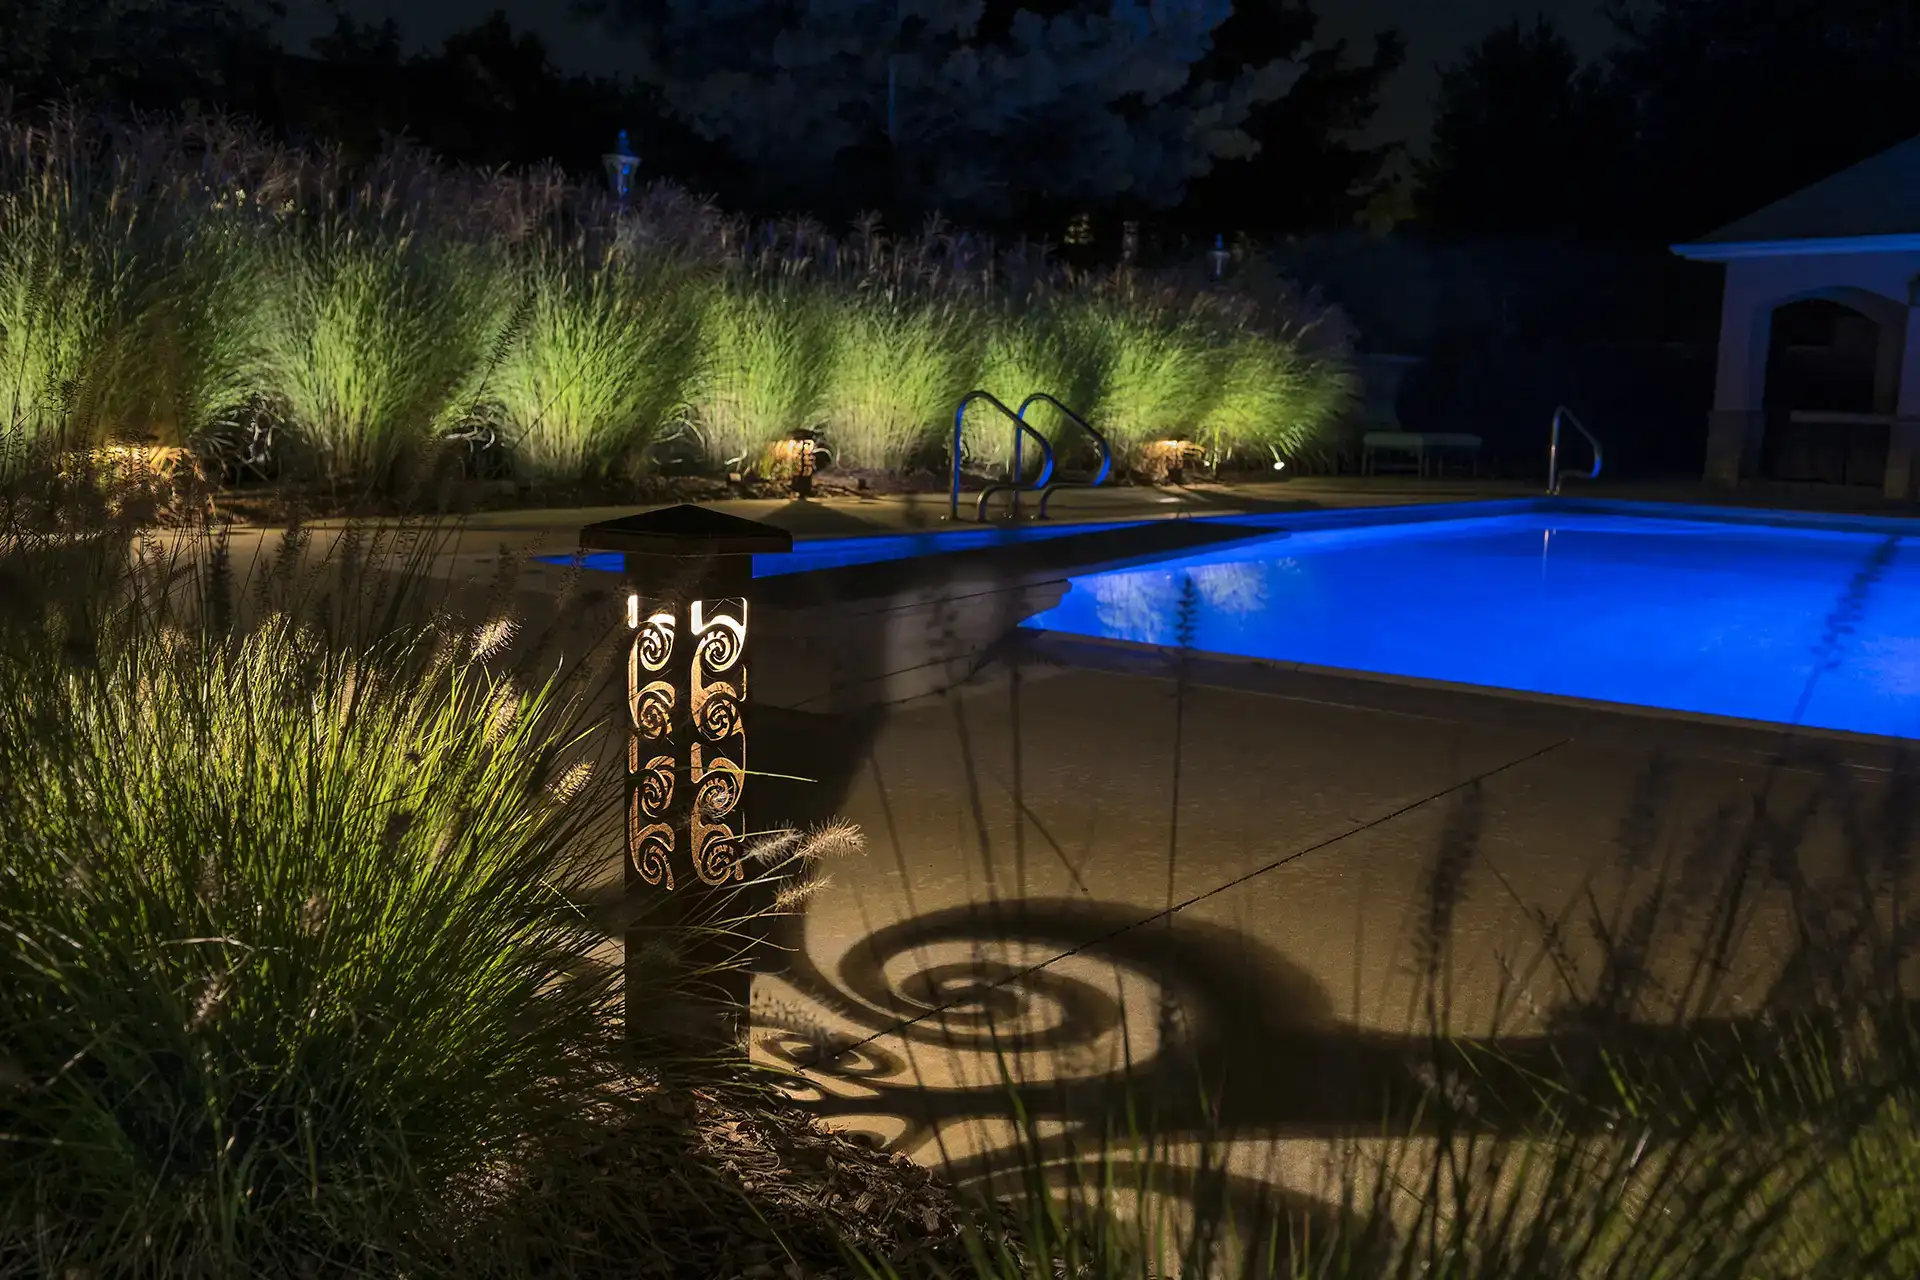 Schneider residence image 10 pool seating area bollard light Lighthouse Outdoor Lighting and Audio central Missouri